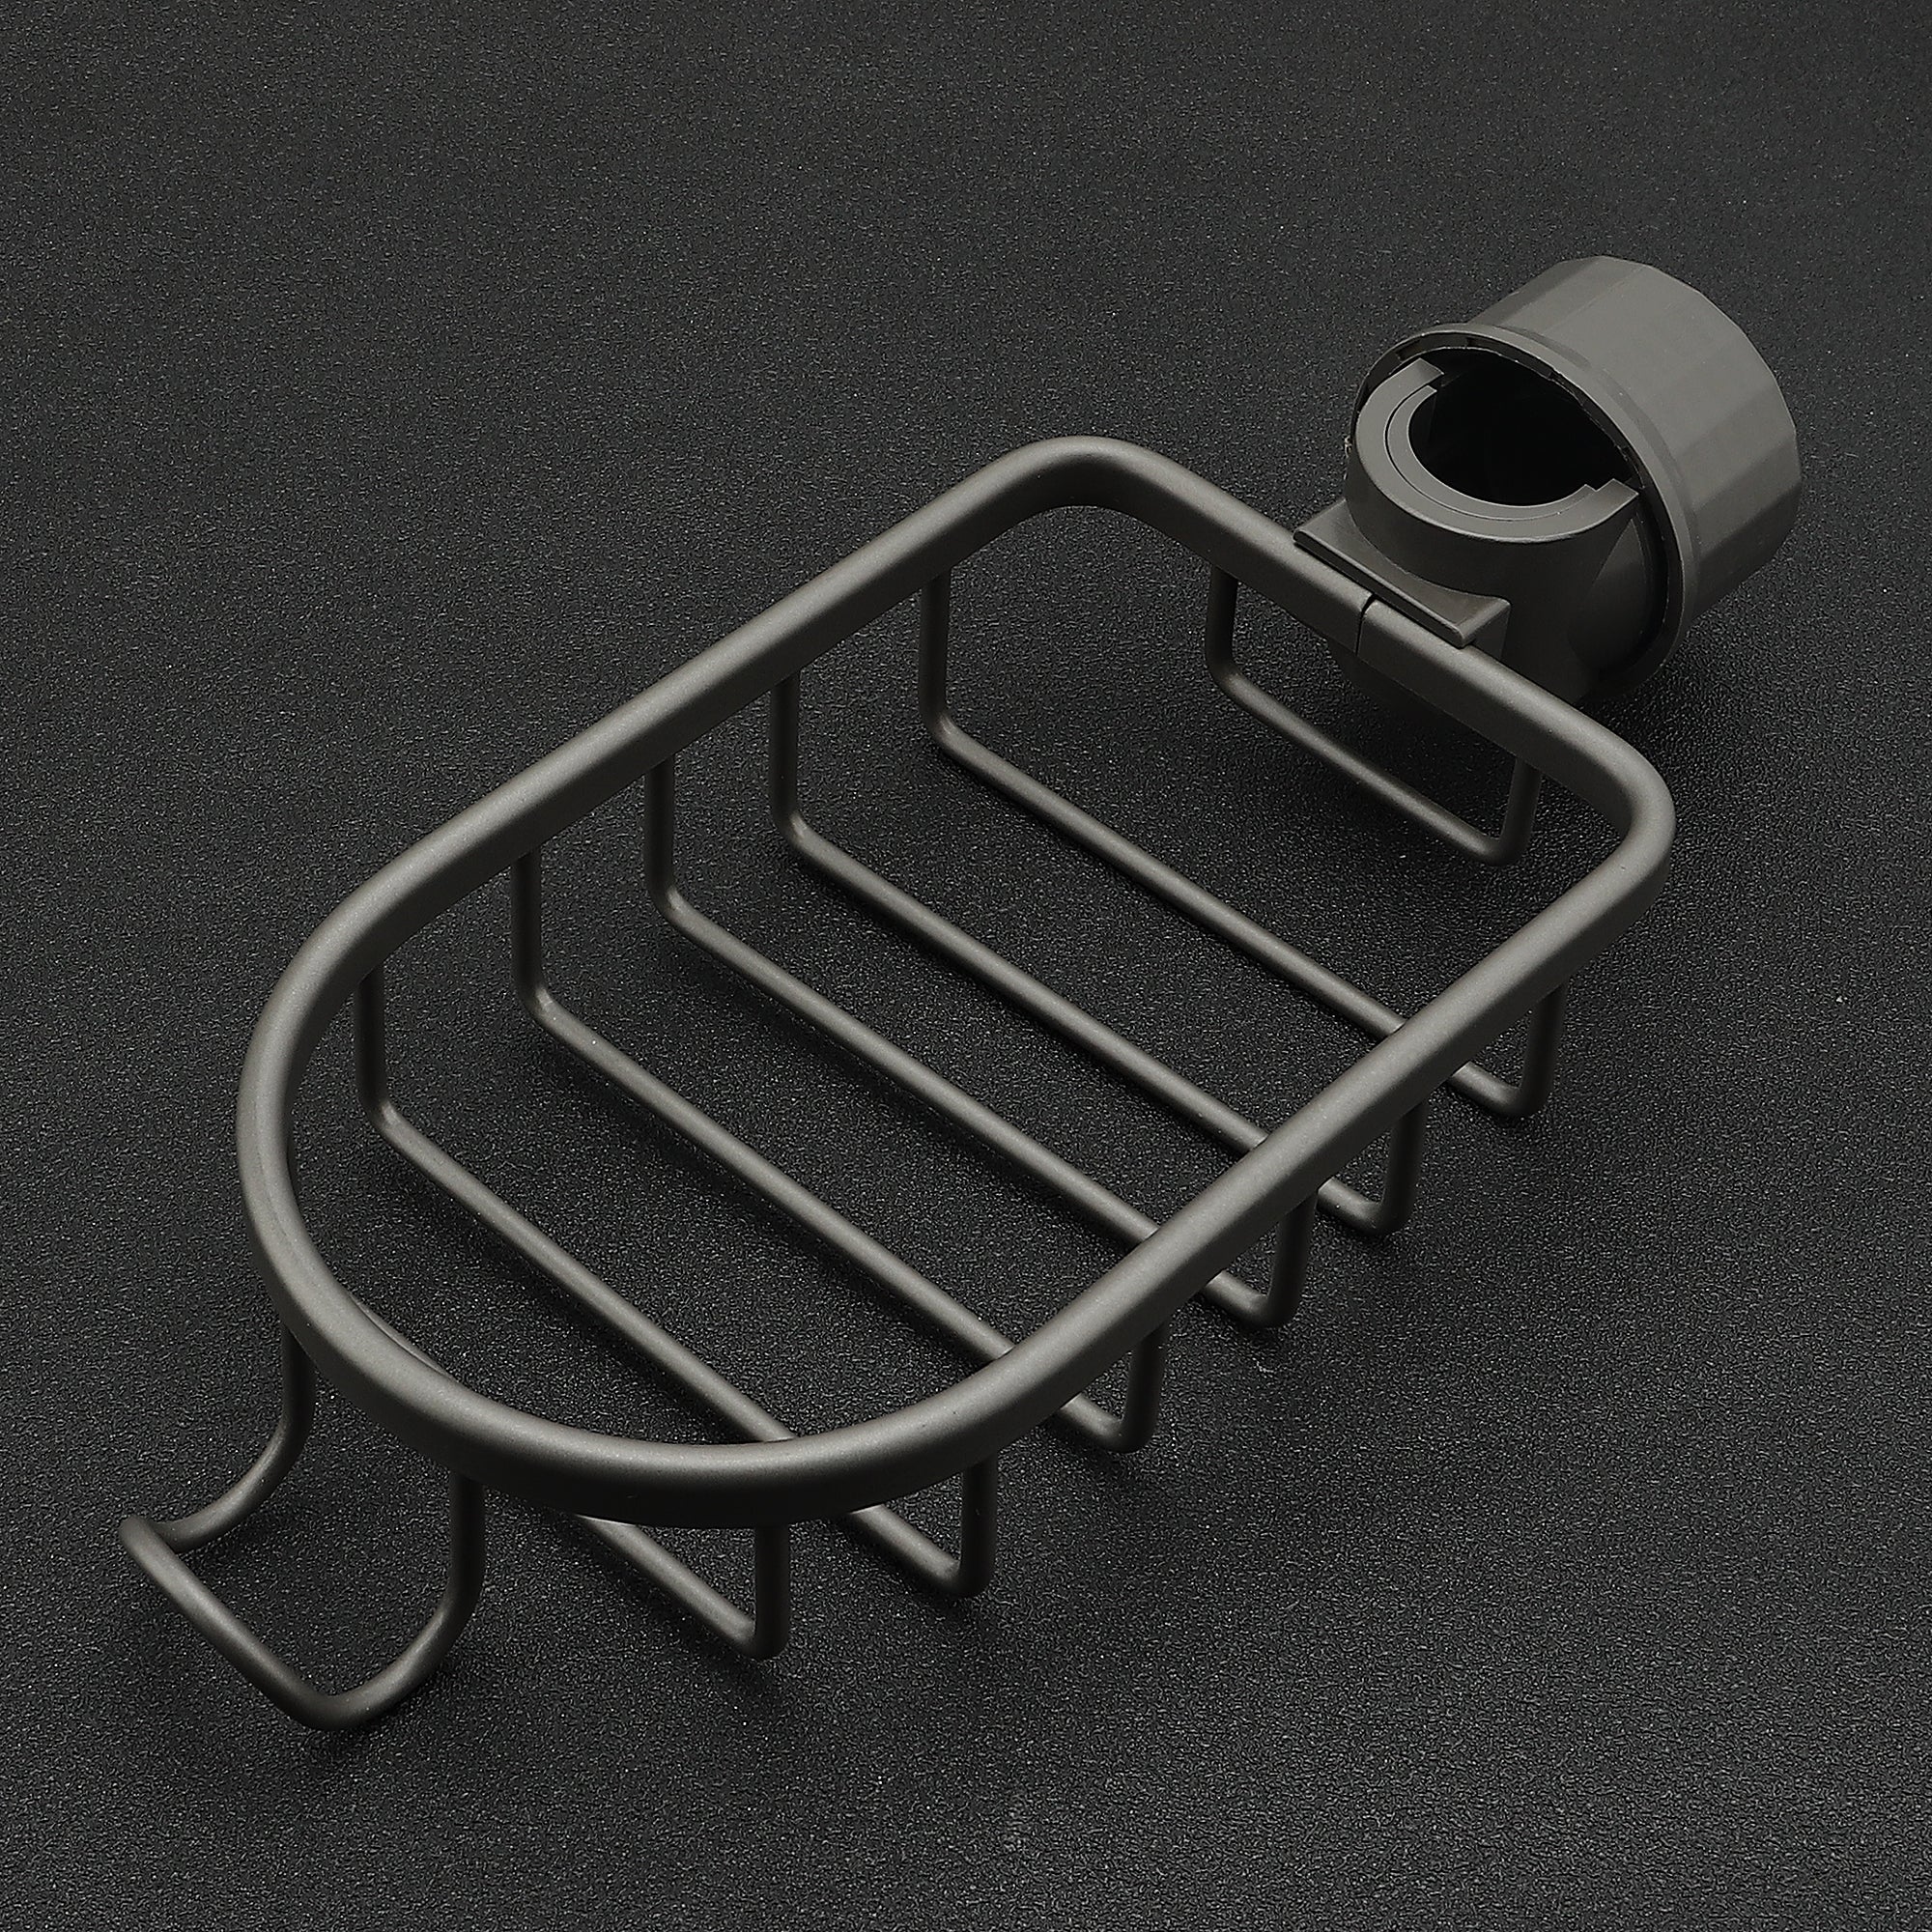 Stylish Sturdy Oil Rubbed Bronze Metal Wire Small Dish Drainer Drying Rack